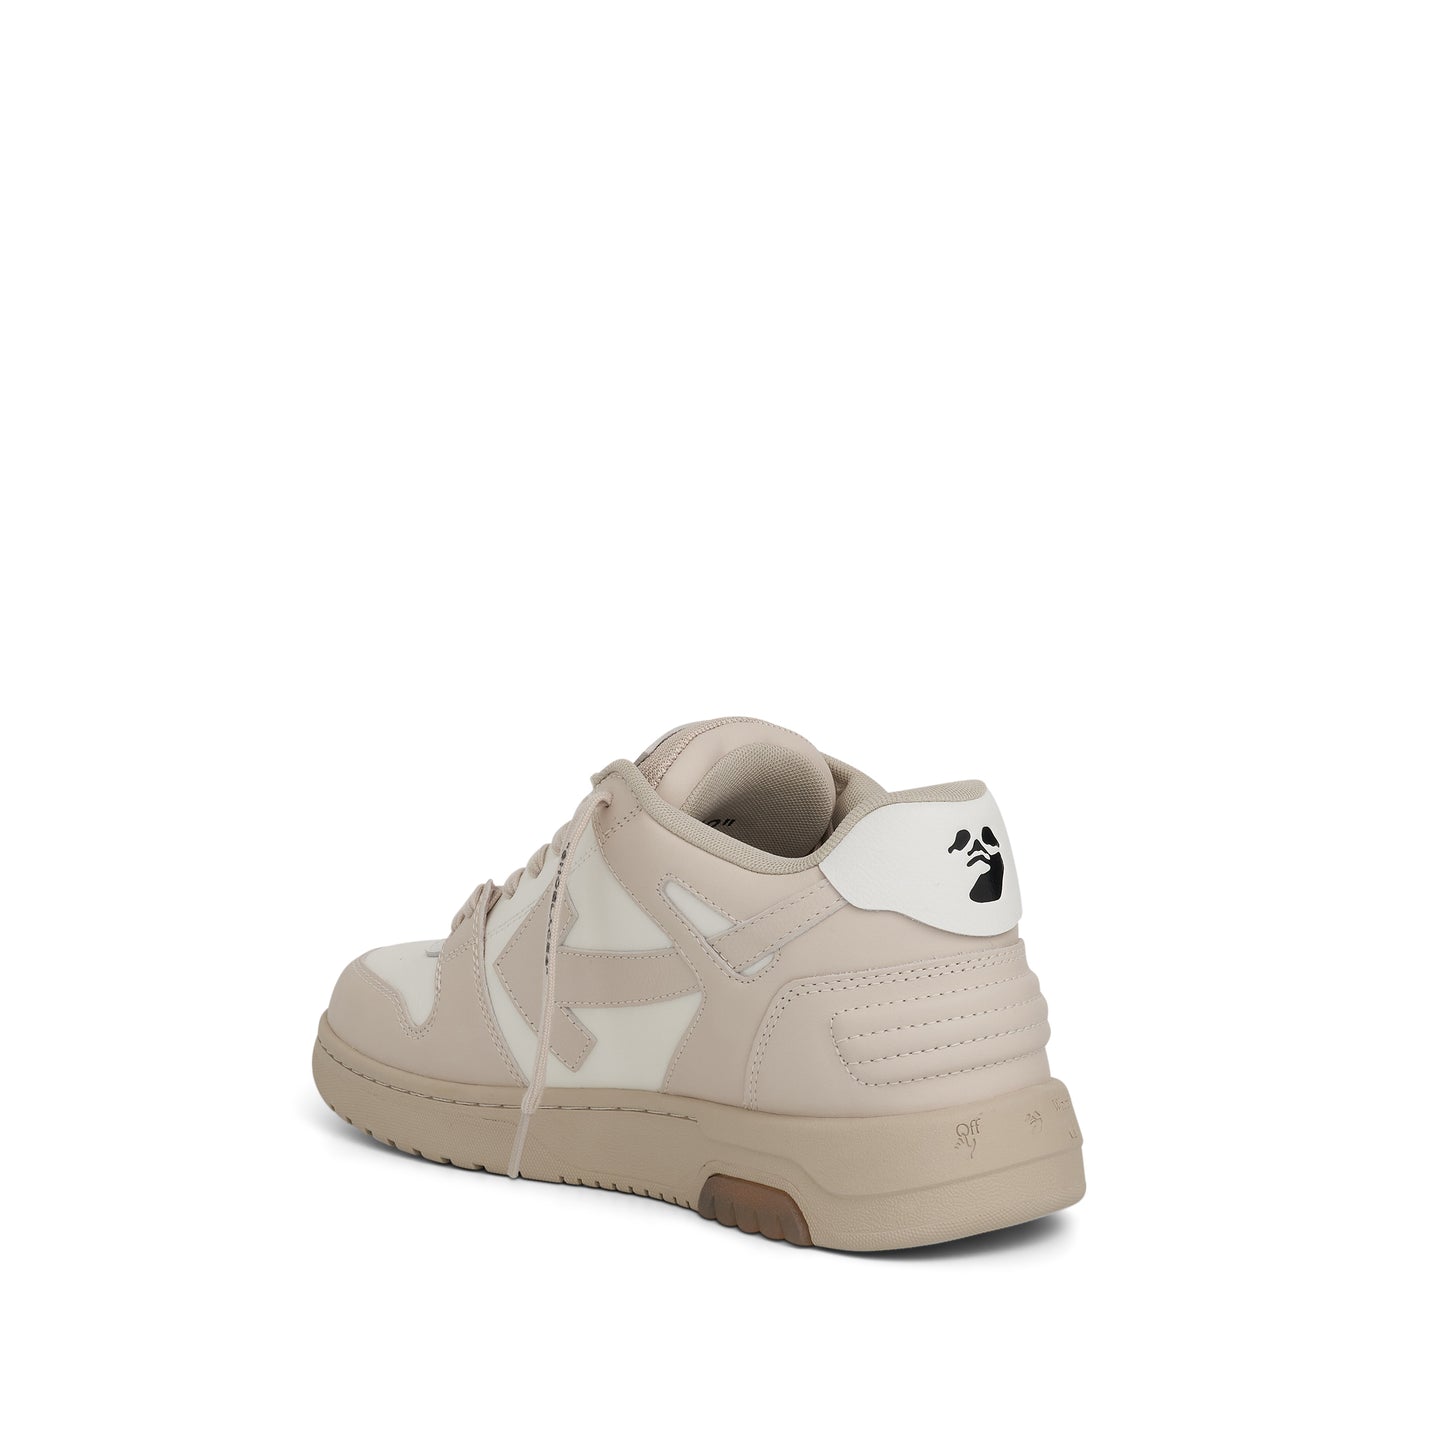 Out Of Office Calf Leather Sneaker in Beige/White